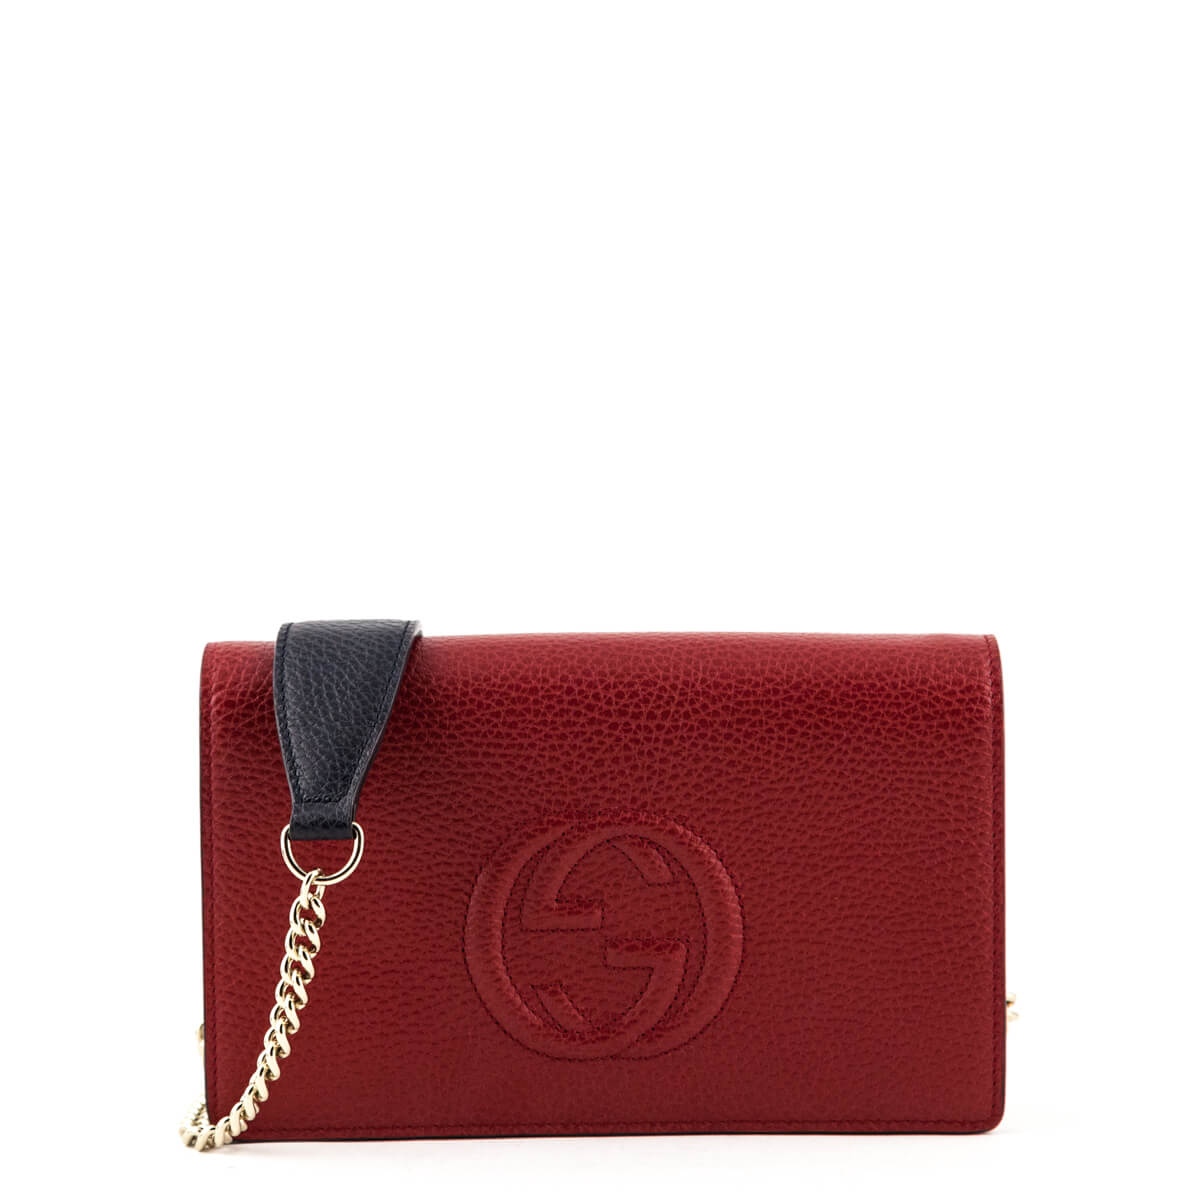 Gucci Tri-color Pebbled Calfskin Soho Wallet on Chain - Love that Bag etc - Preowned Authentic Designer Handbags & Preloved Fashions